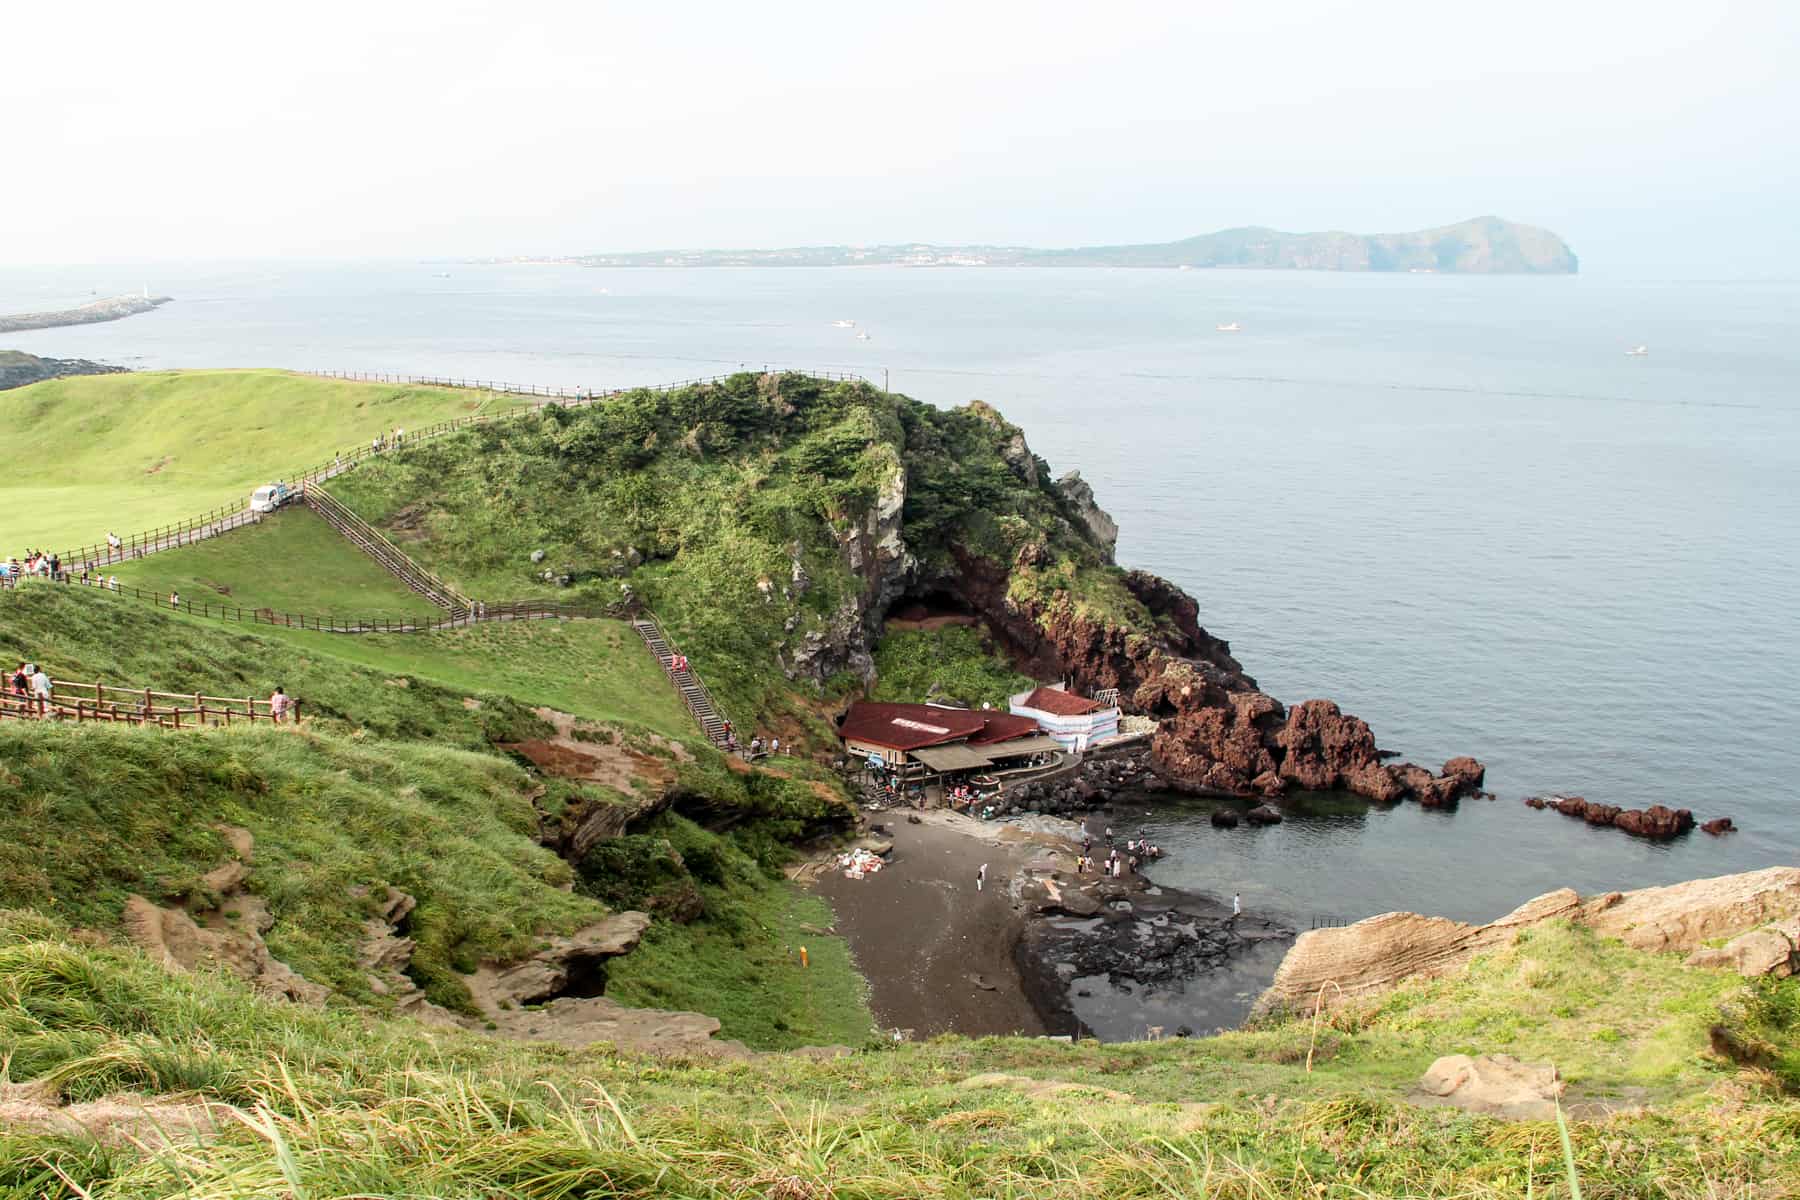 People walking on narrow paths on a green mound of Jeju Island's Sunrise Peak, looking down onto red-roofed houses, coastal rocks and the vast ocean.